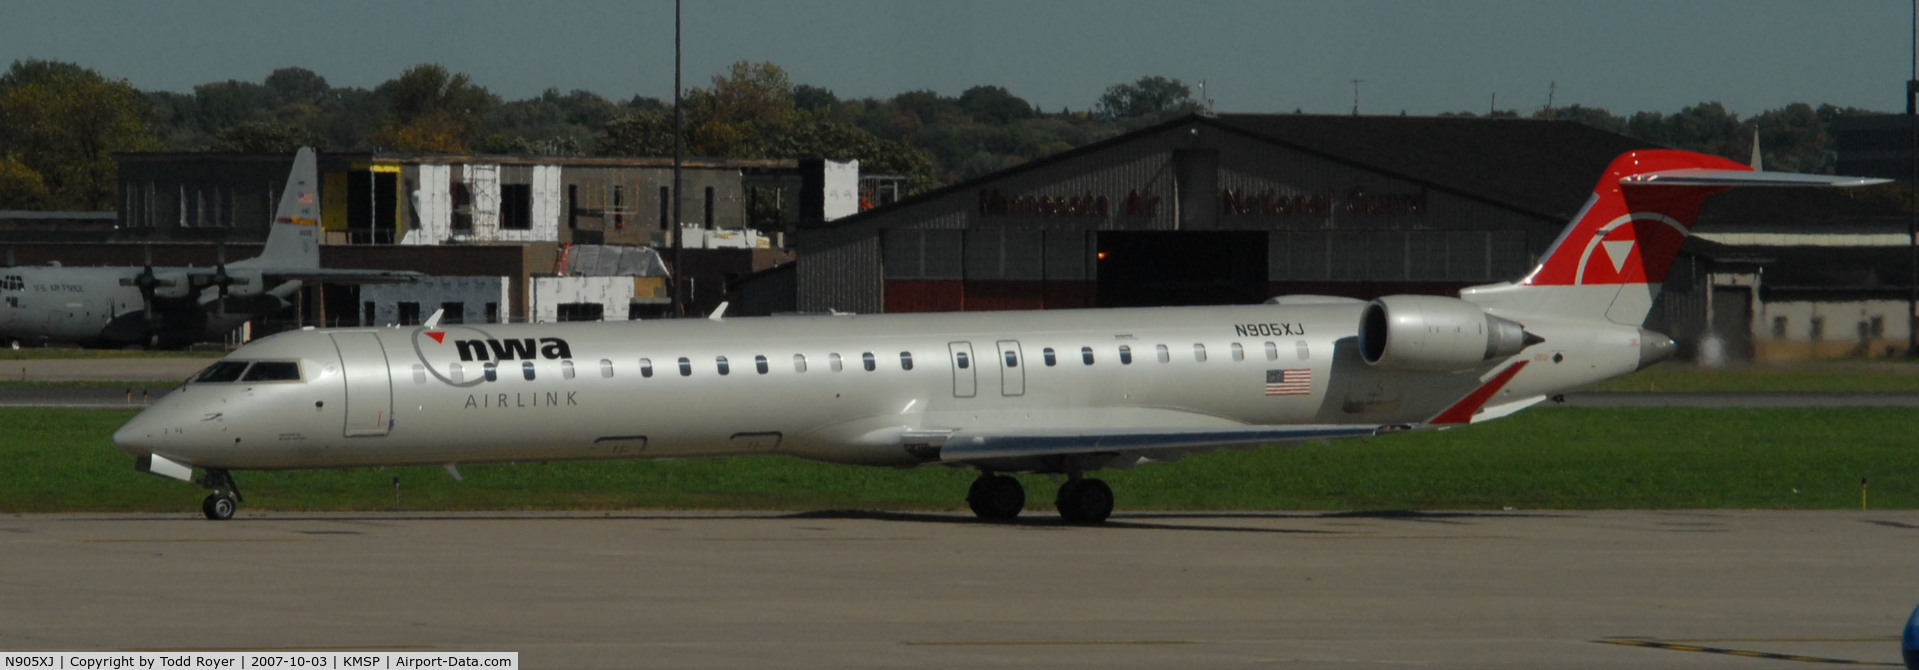 N905XJ, 2007 Bombardier CRJ-900 (CL-600-2D24) C/N 15137, Taxi for departure